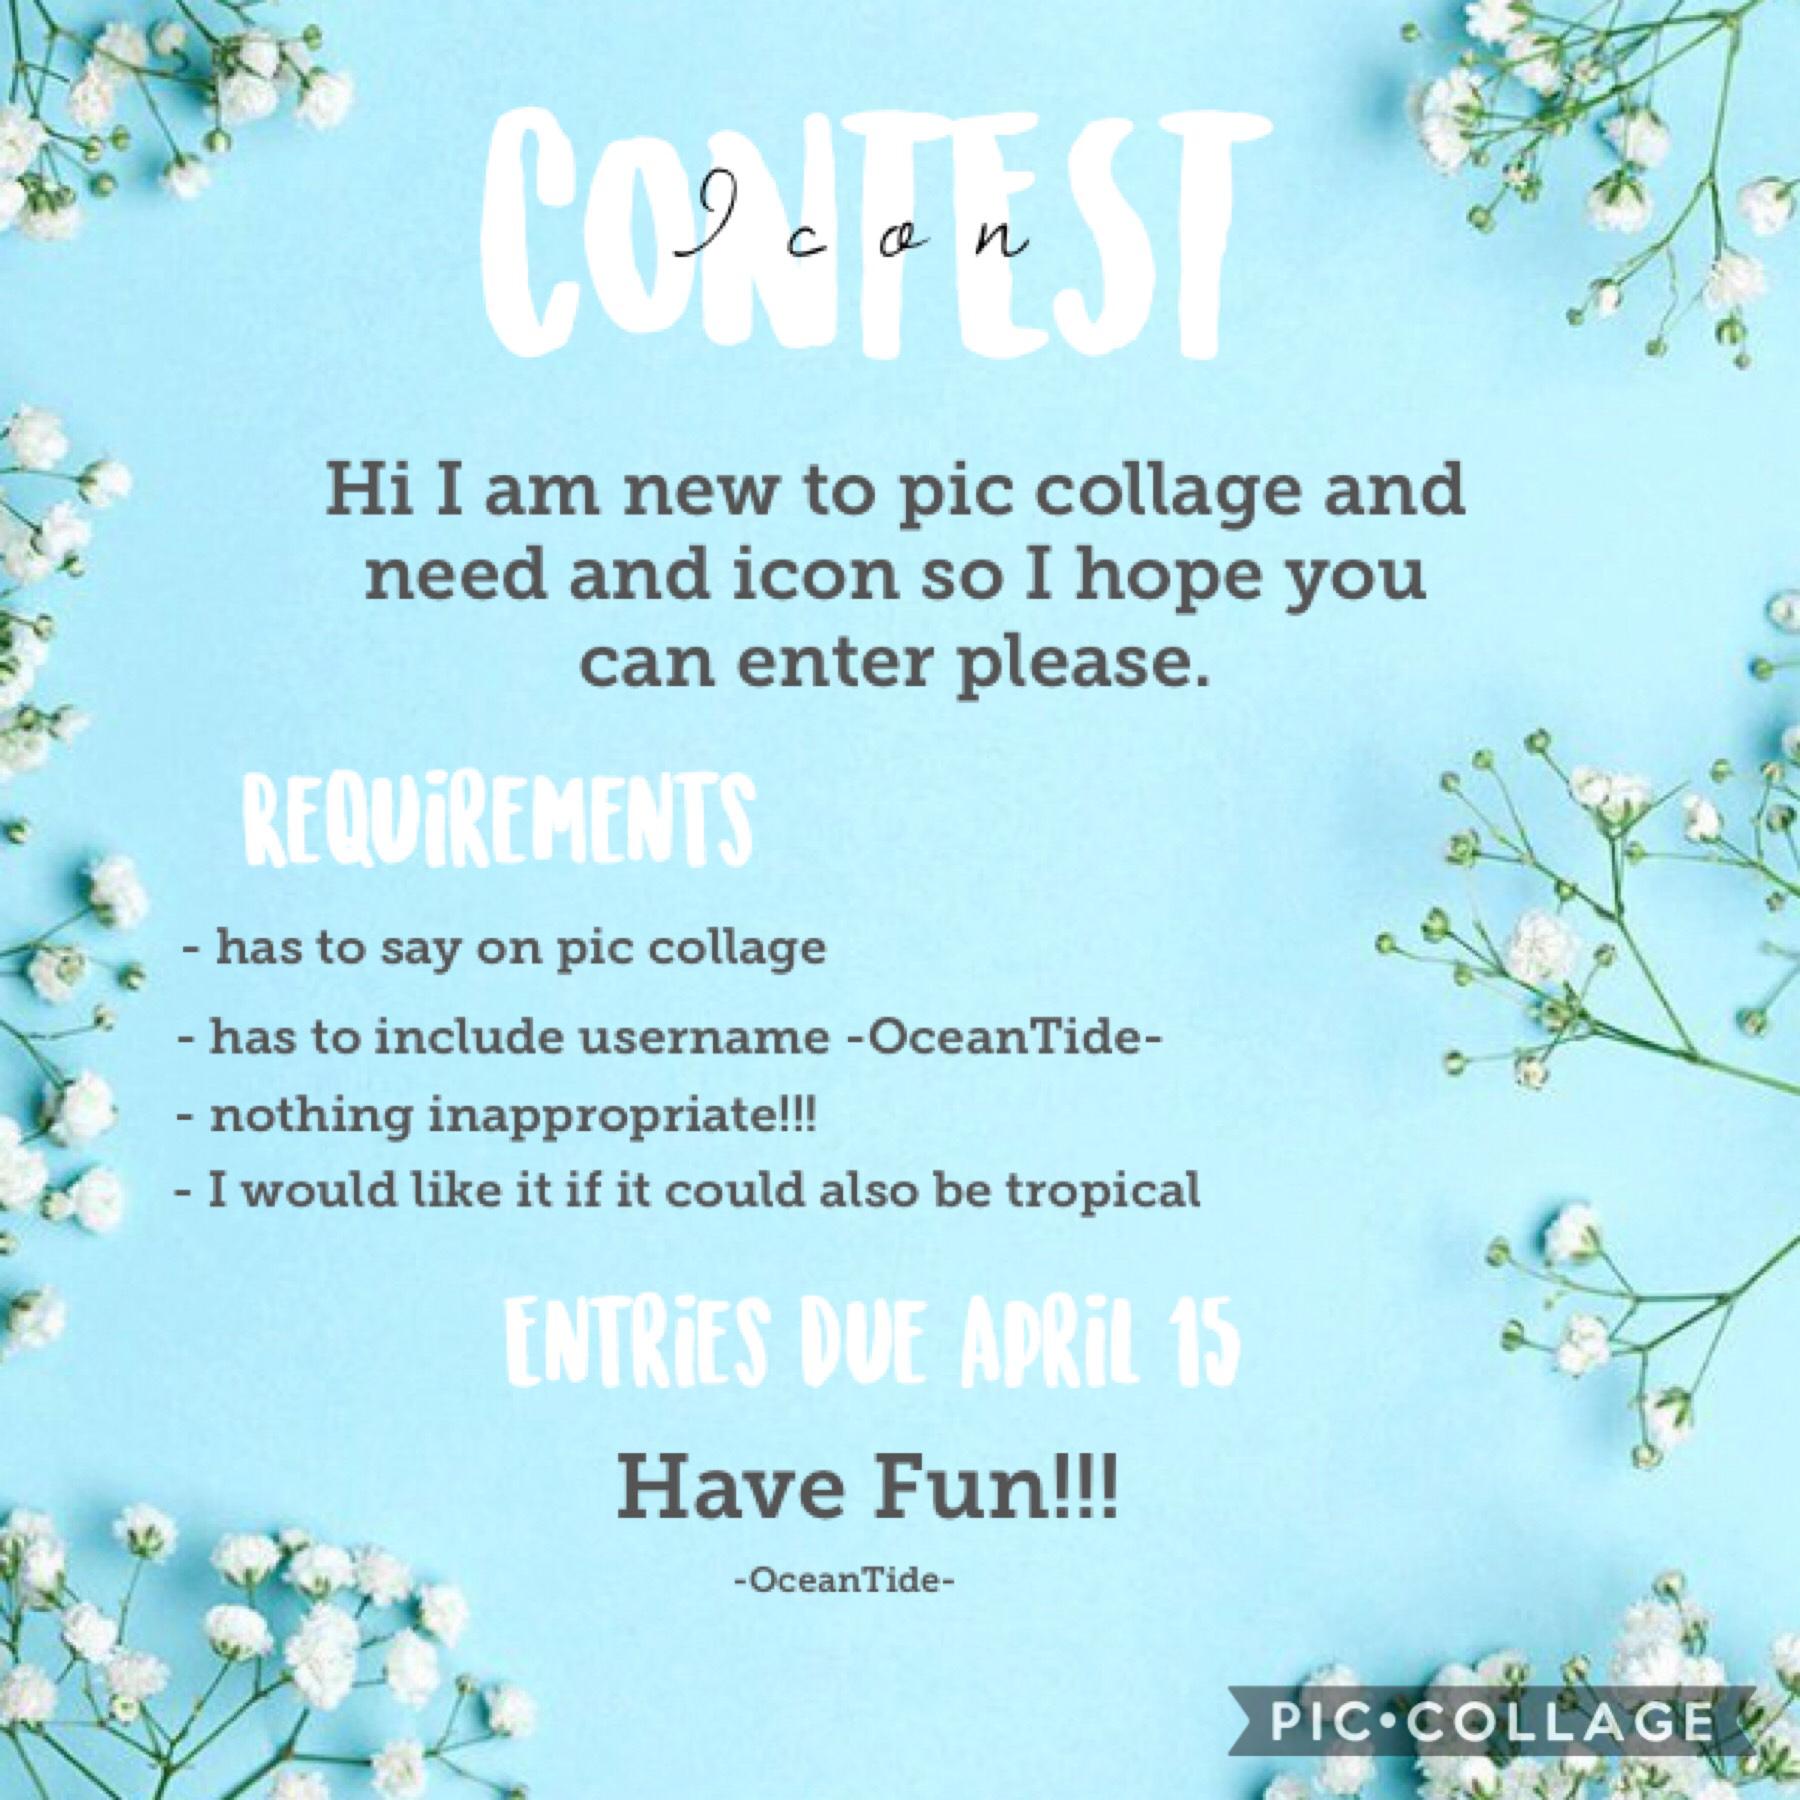 Have fun and please enter!!!